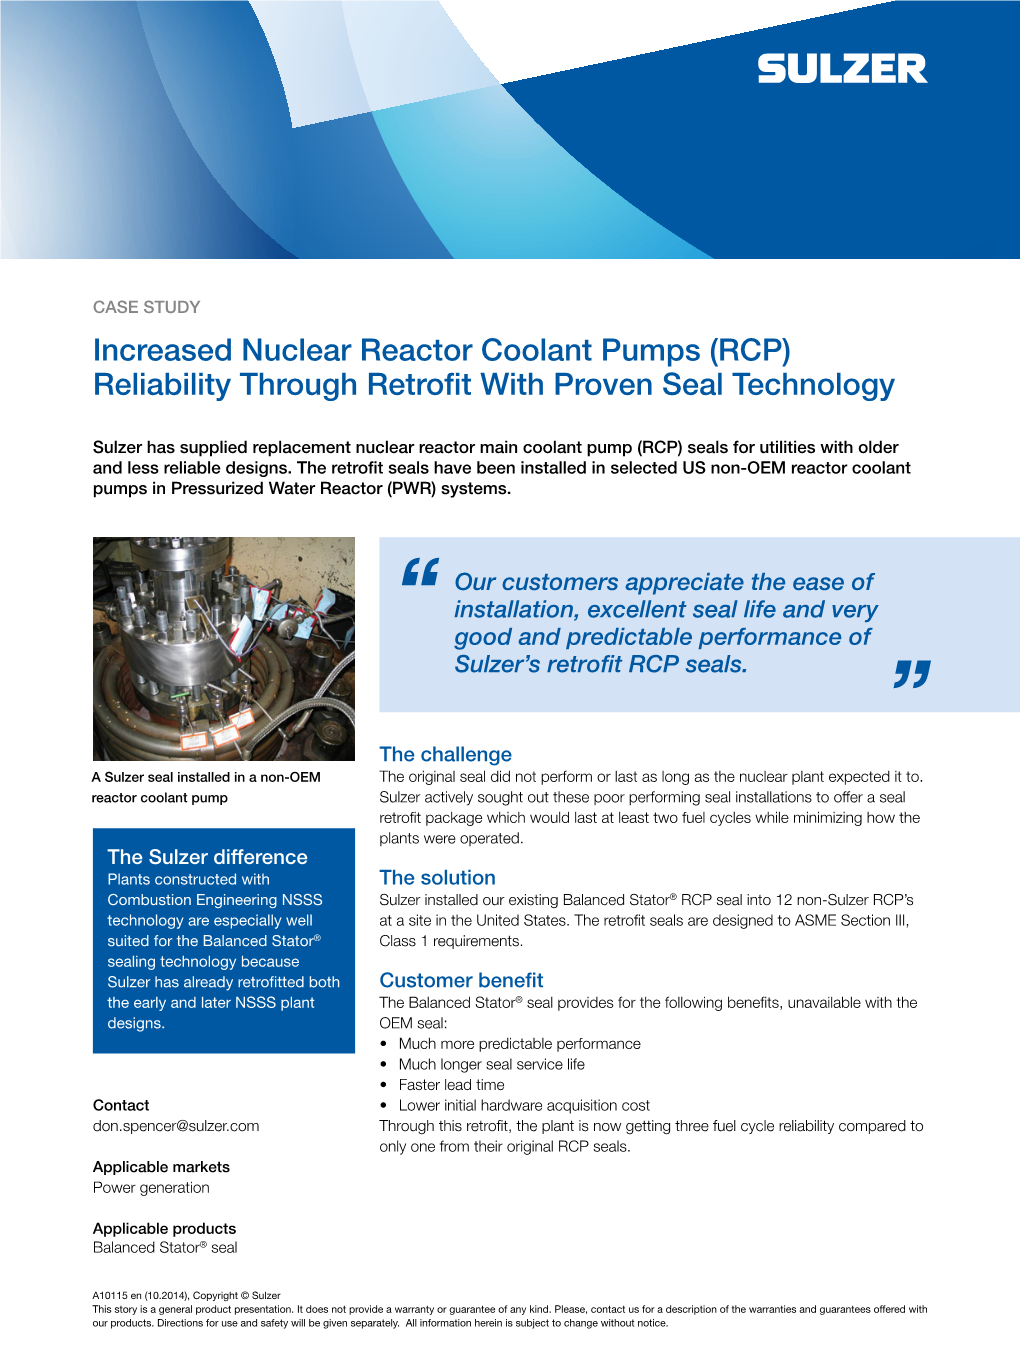 Increased Nuclear Reactor Coolant Pumps (RCP) Reliability Through Retrofit with Proven Seal Technology